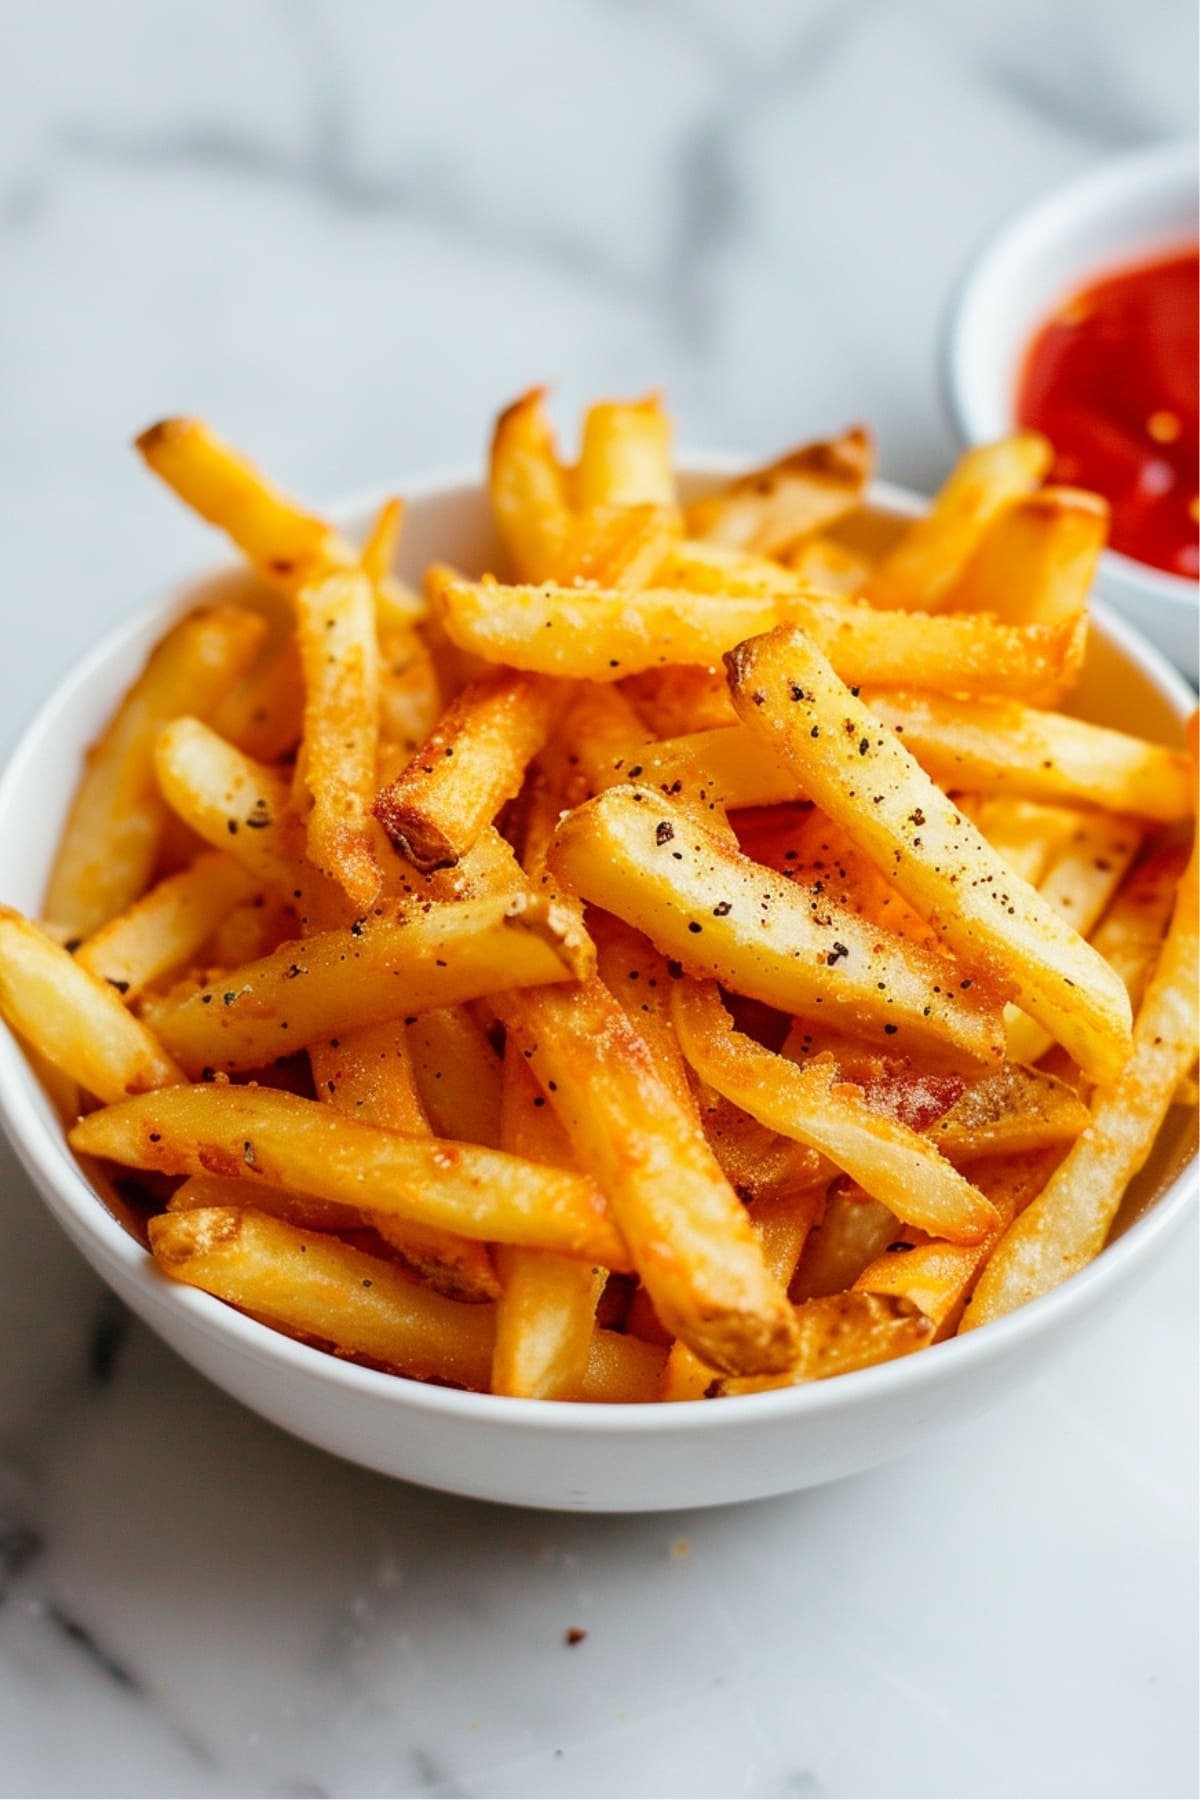 Fries in a white bowl seasoned with pepper.